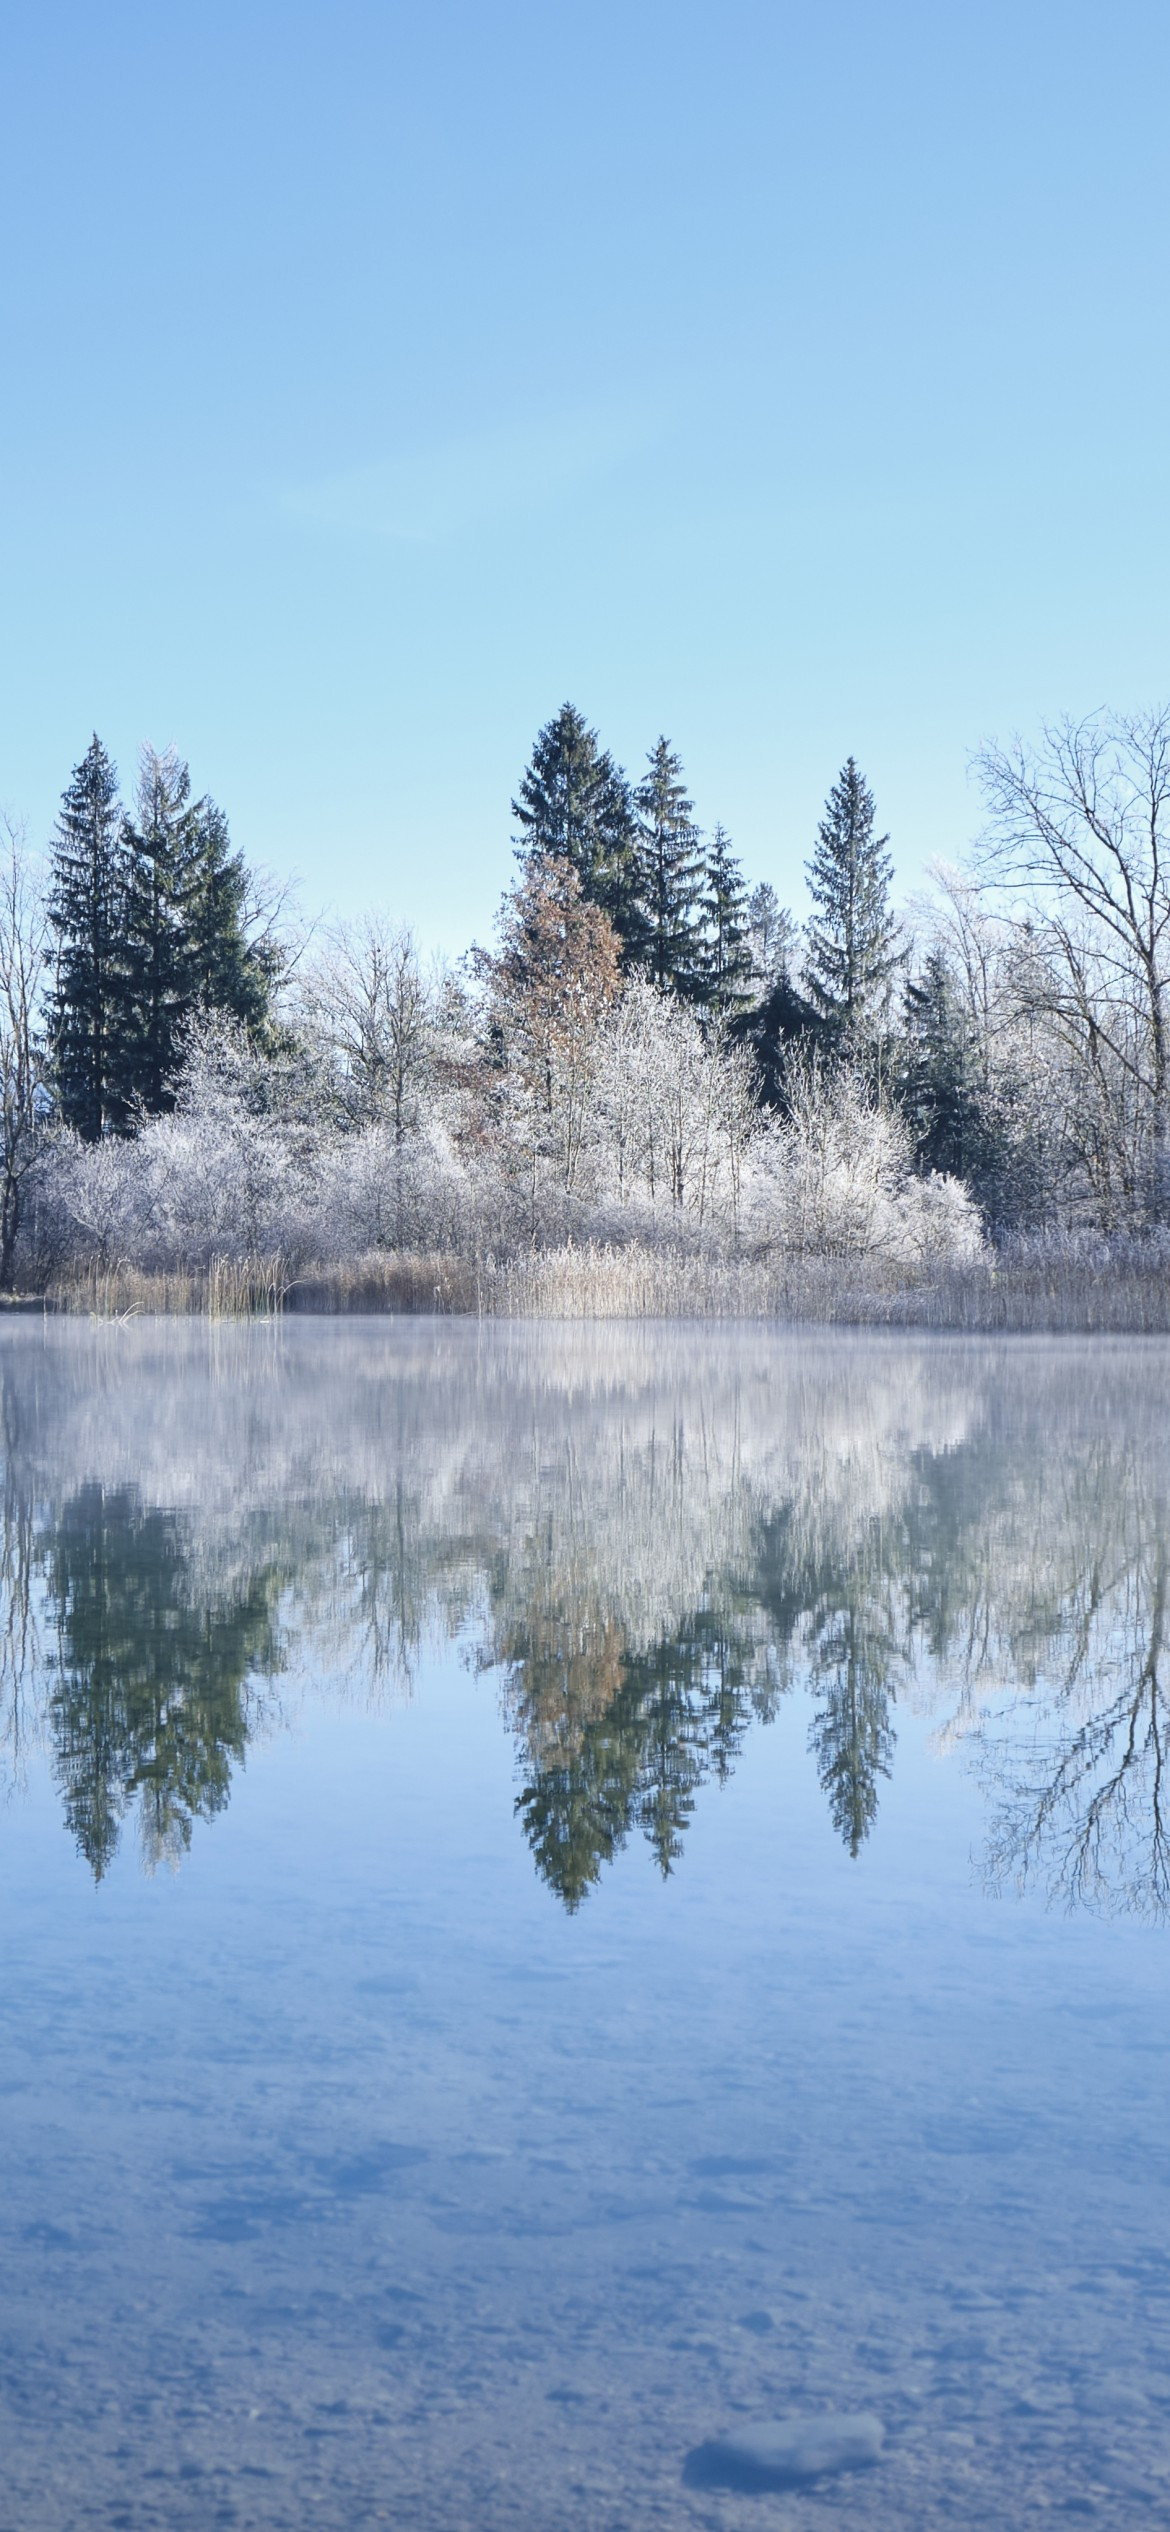 Download 1170x2532 Snow, Winter, Lake, Reflection, Clear Sky, Trees, Frost Wallpaper for iPhone 12 Pro